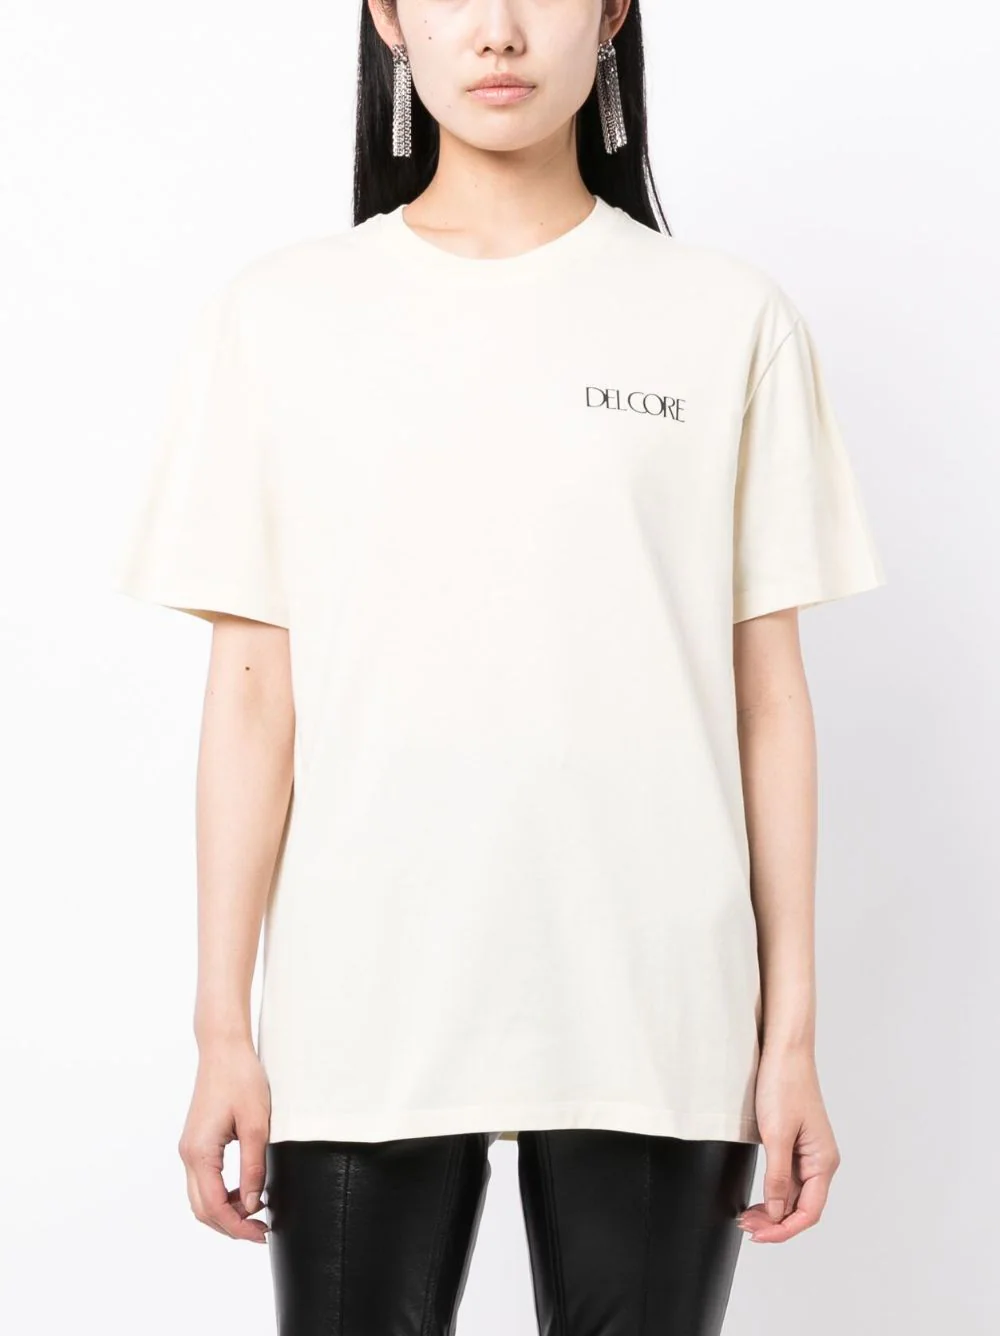 Del Core T-Shirt With Coral Print White 3